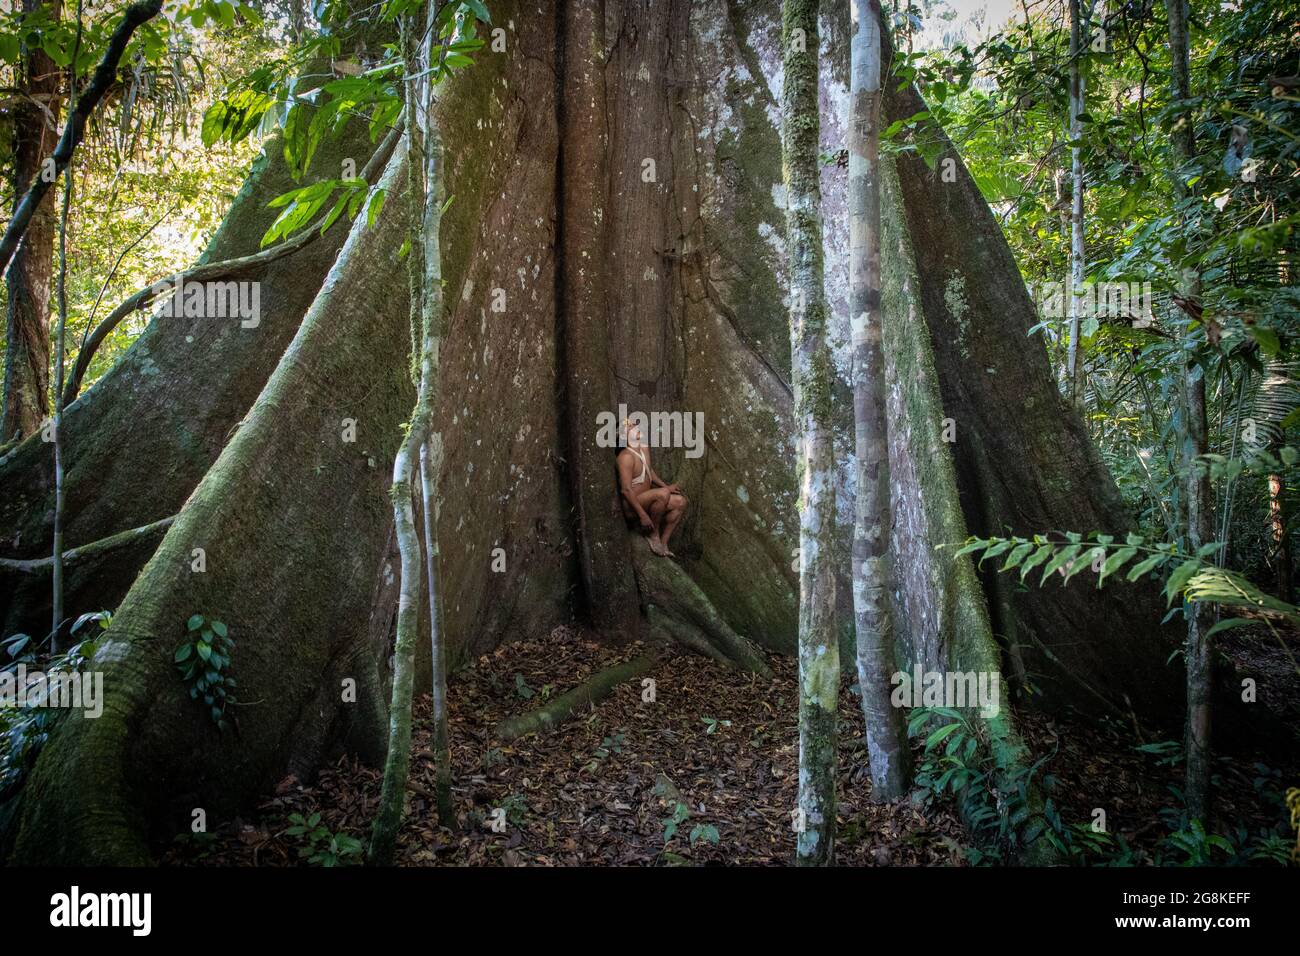 A man sat on the roots of the kapok tree and gazed upwards. AMAZONIAN ECUADOR: In one image, a woman wore red makeup across her eyes and a feathered h Stock Photo